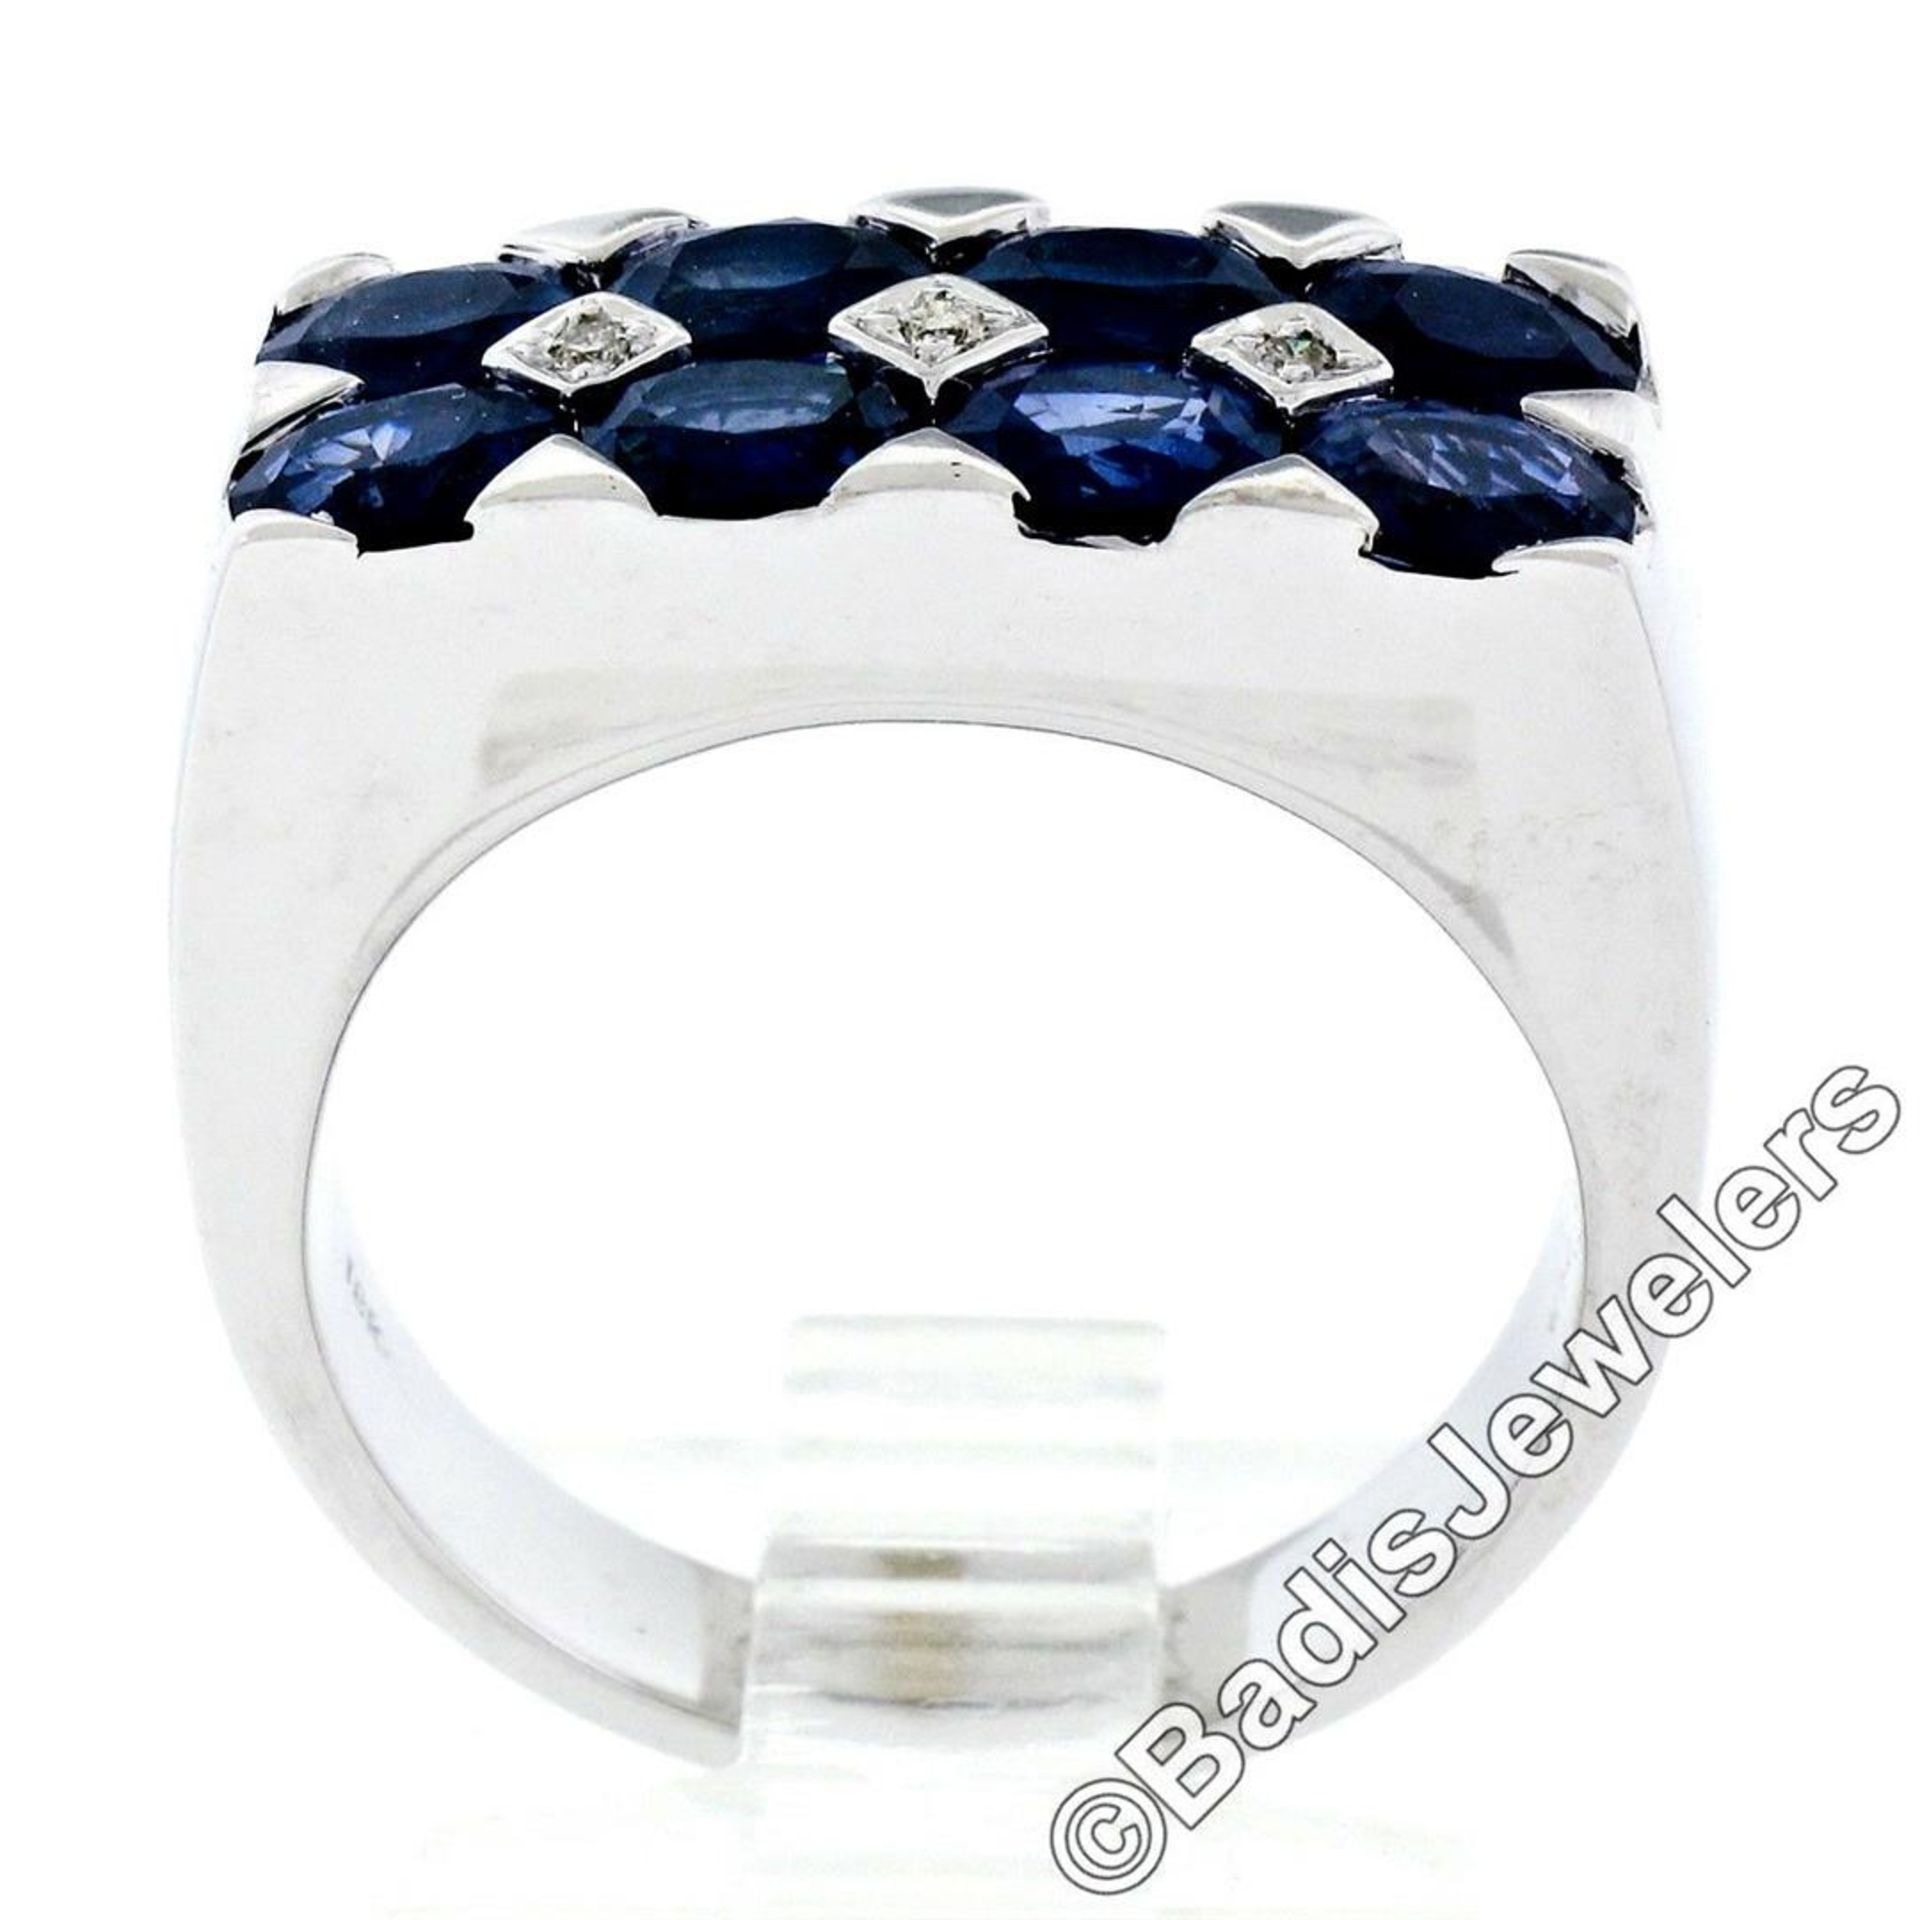 18kt White Gold 4.03ctw Dual Row Oval Cut Sapphire & Diamond Band Ring - Image 6 of 9